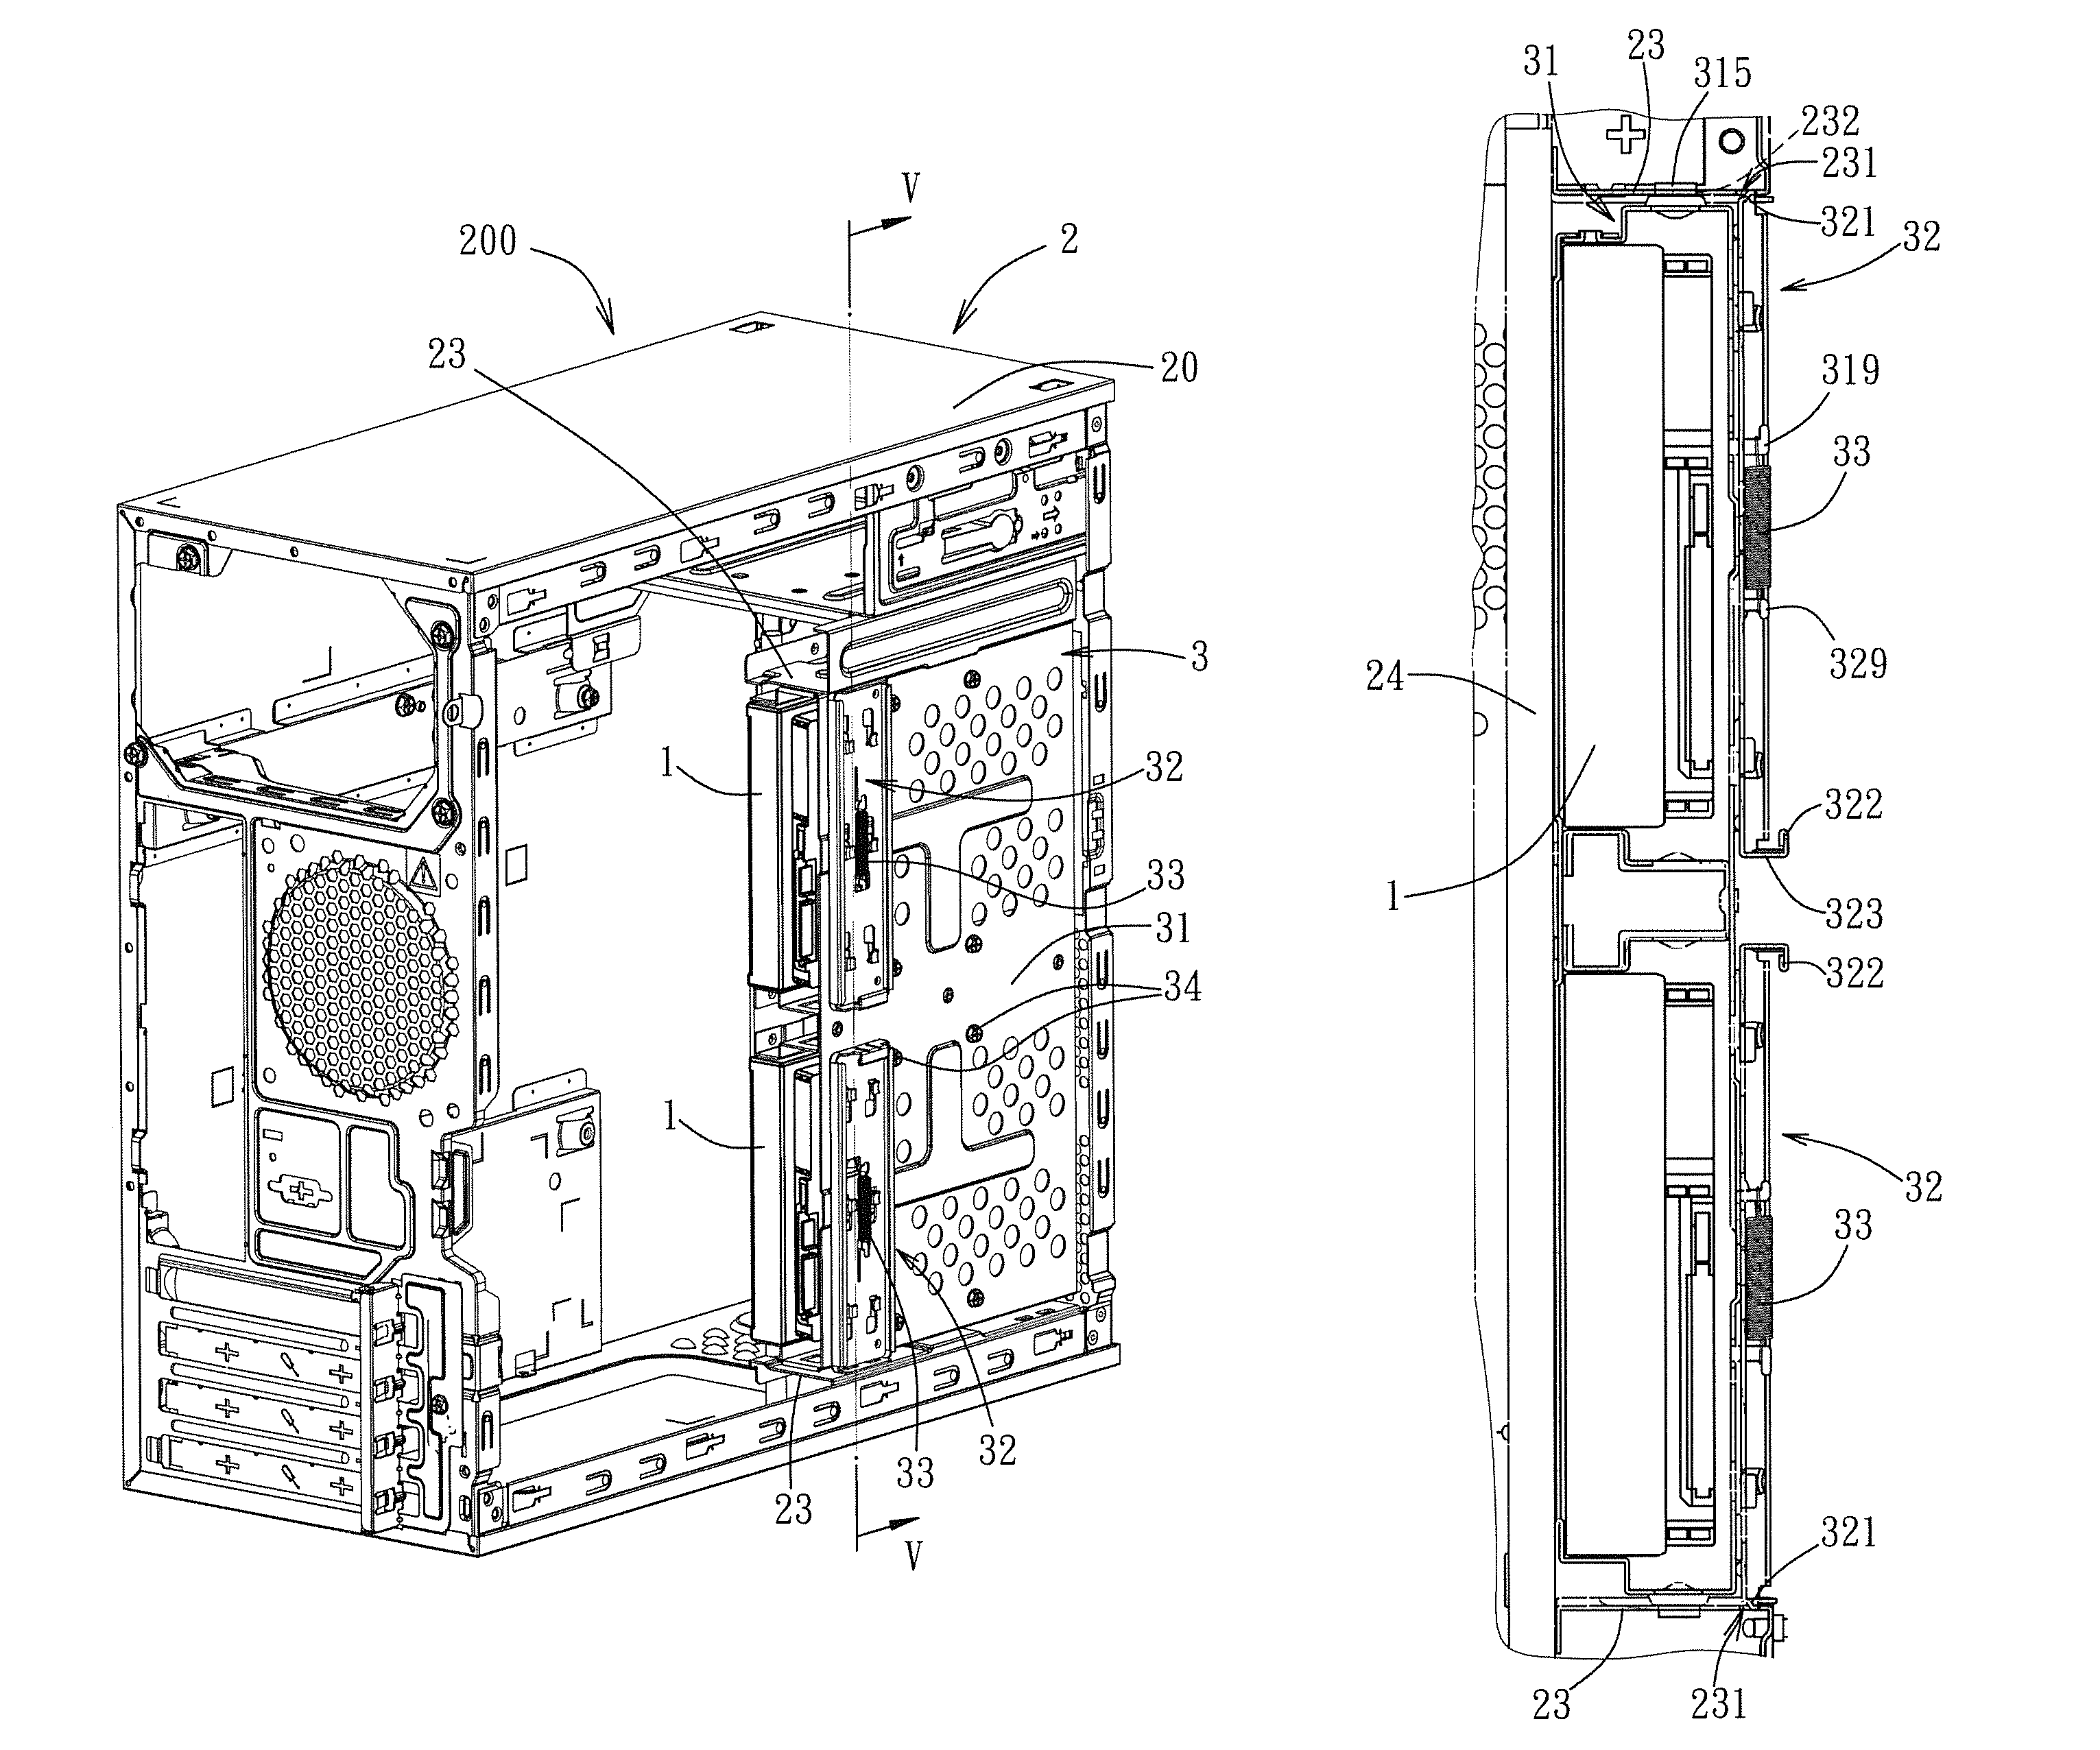 Housing having a carrier device